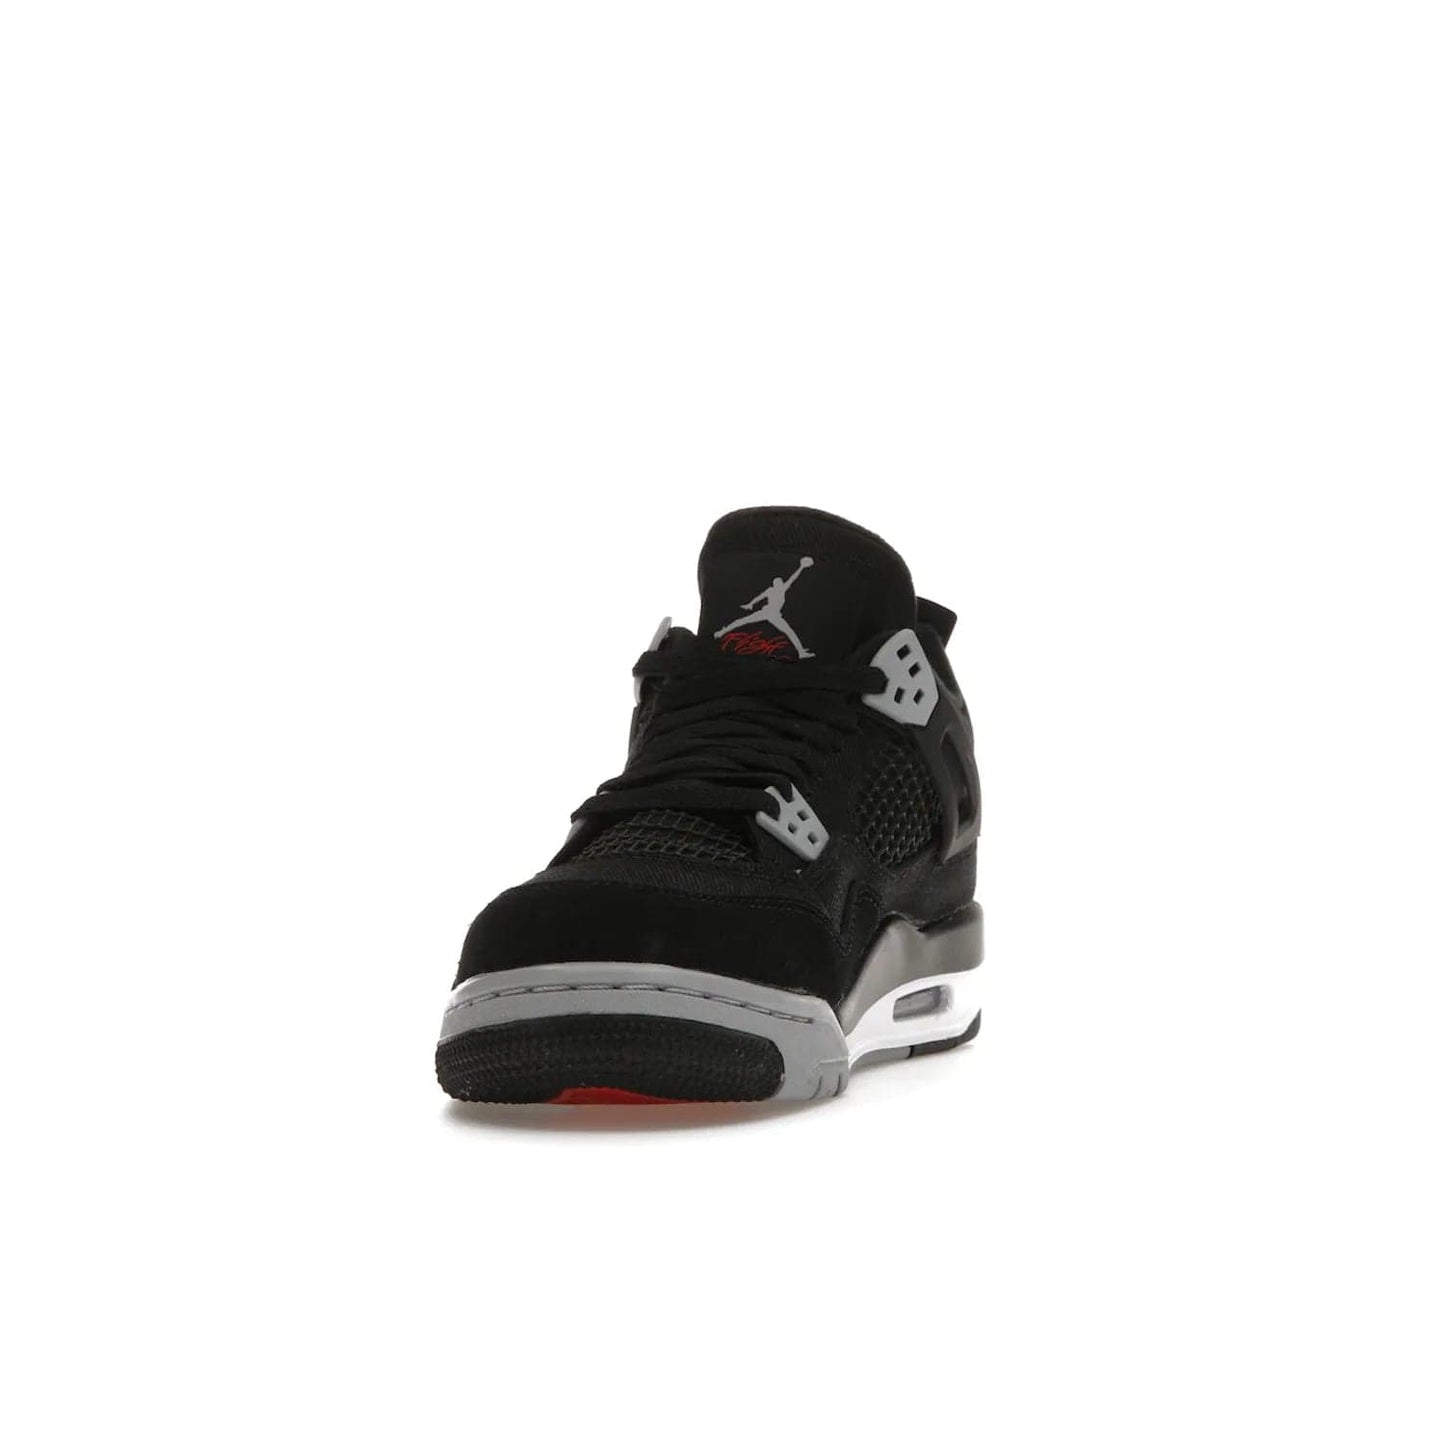 Jordan 4 Retro Black Canvas (GS) - Image 12 - Only at www.BallersClubKickz.com - Premium Air Jordan 4 Retro Black Canvas in grade-schooler's catalog. Featuring black suede canvas upper, grey molding, accents in red, white midsole, woven Jumpman tag, & visible AIR cushioning. Releasing Oct. 1, 2022.